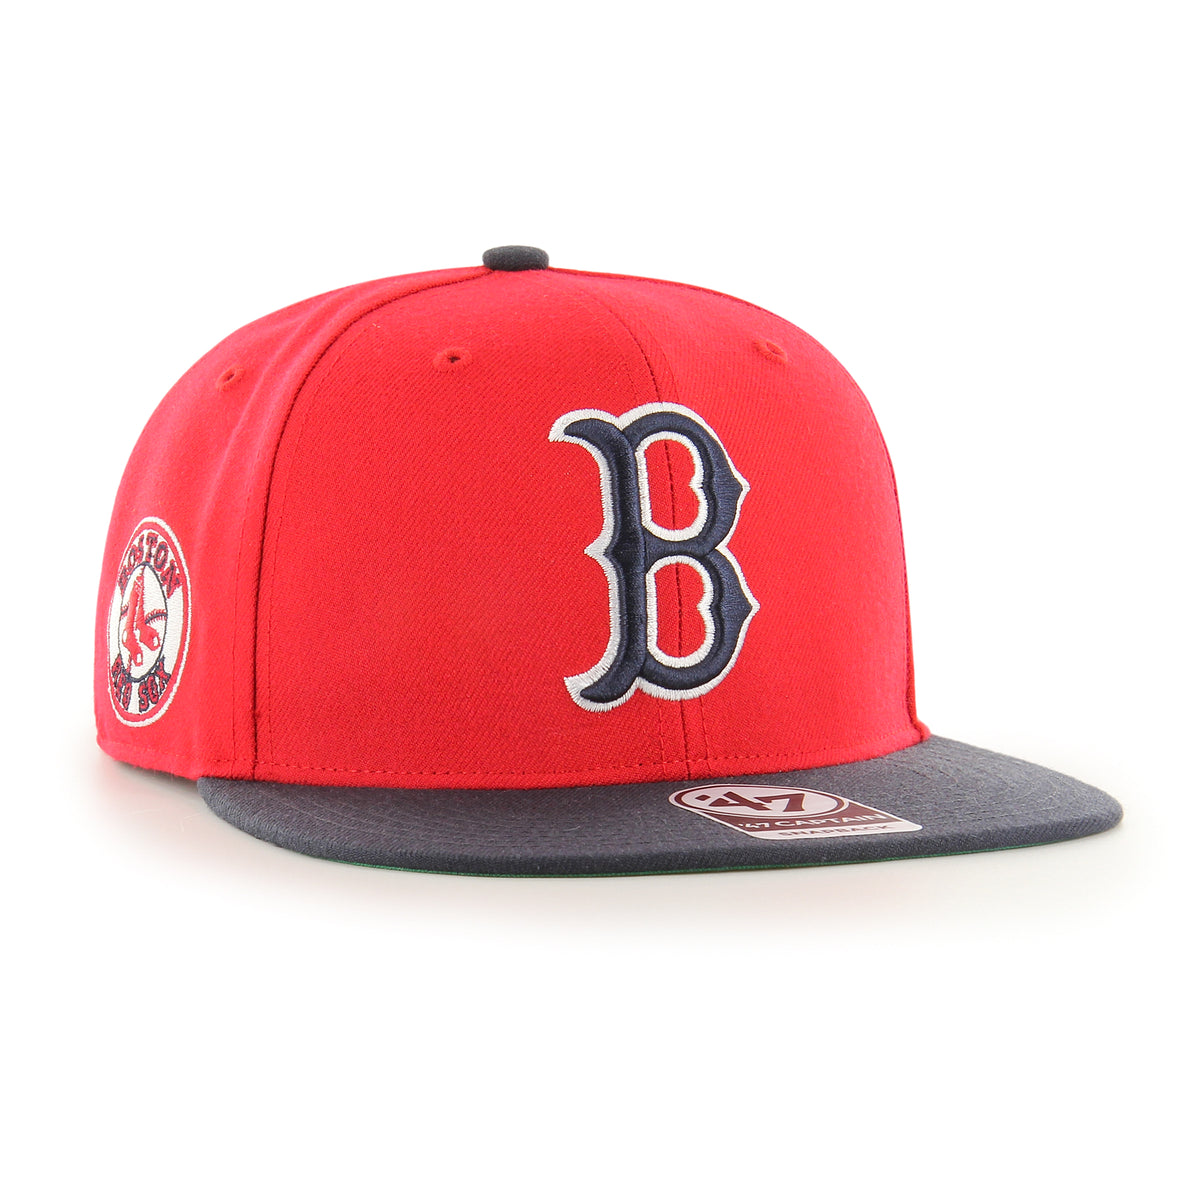 BOSTON RED SOX COOPERSTOWN REPLICA SURE SHOT '47 CAPTAIN